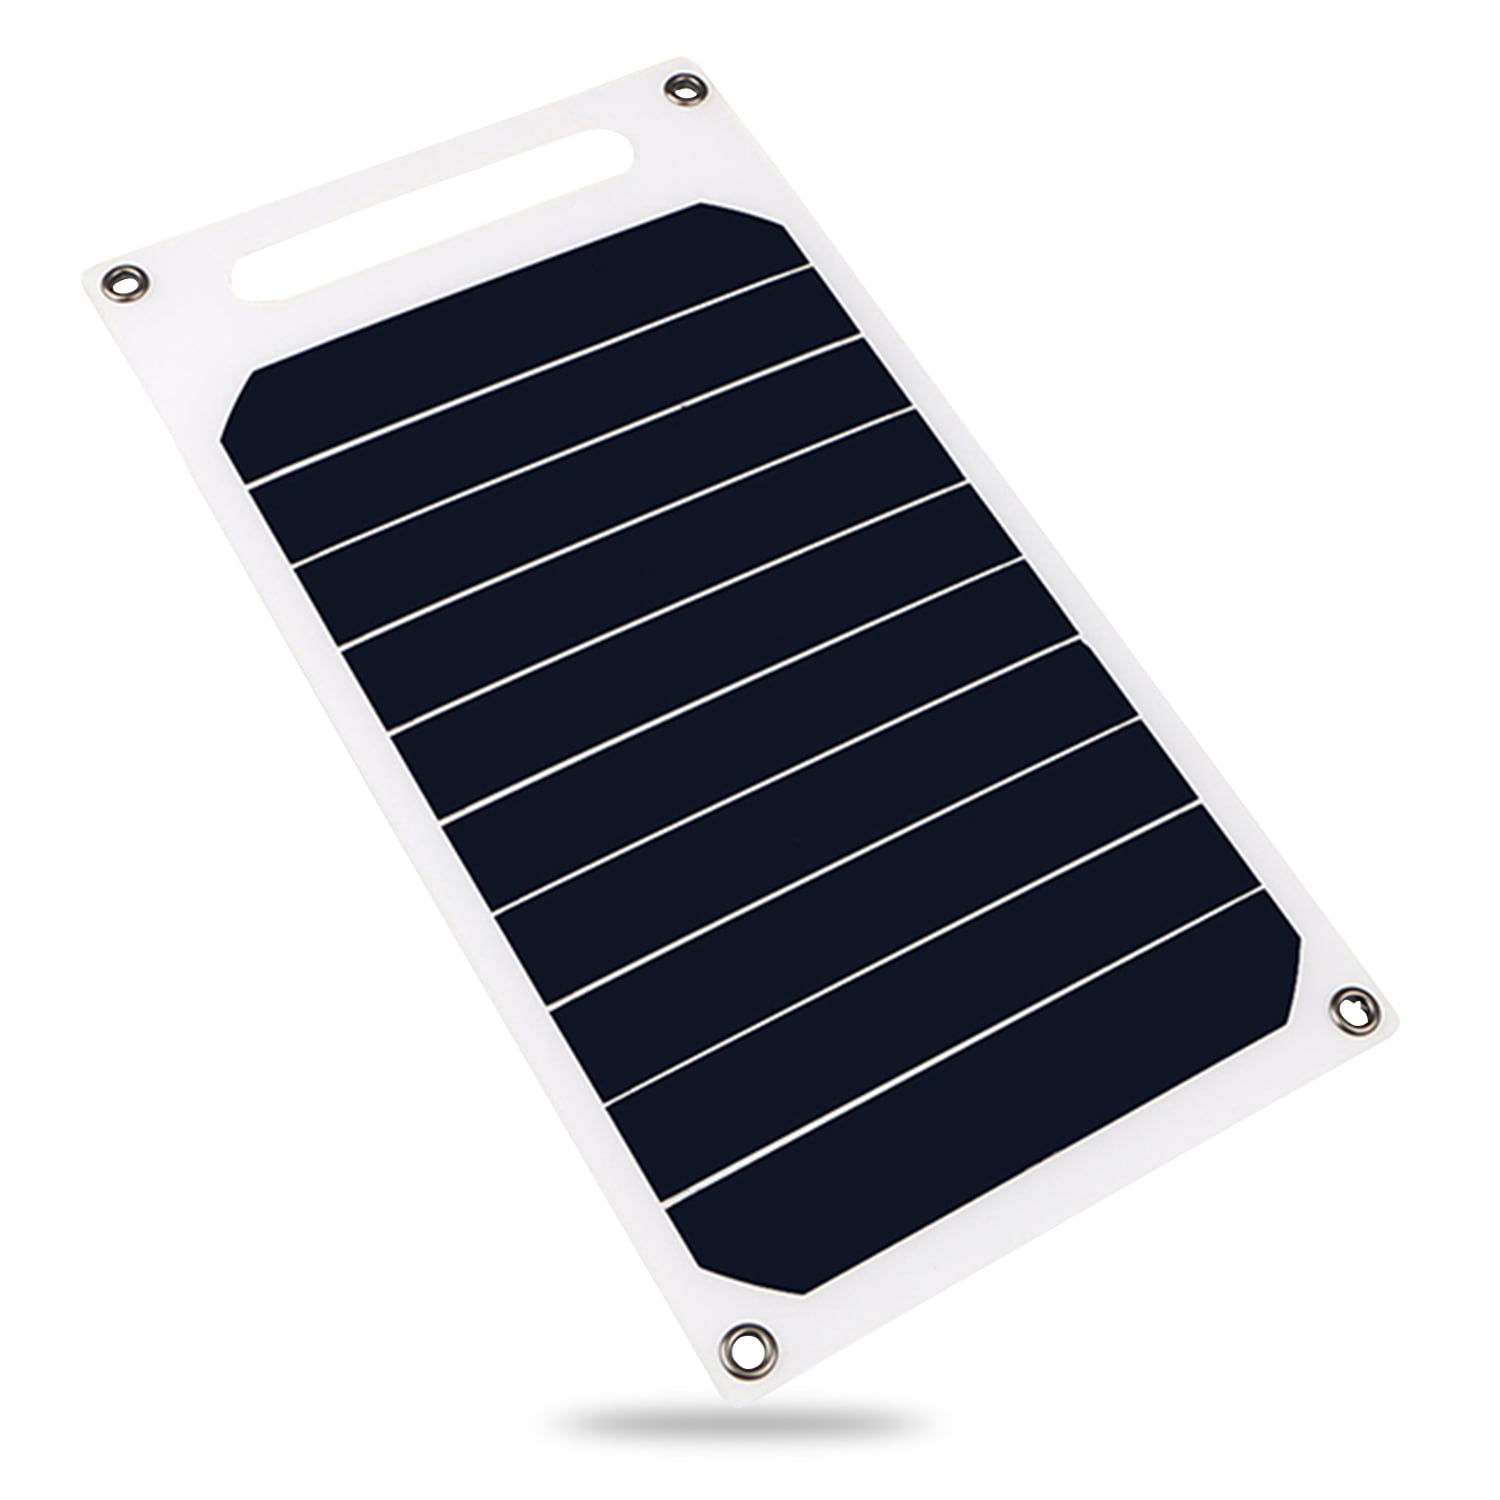 NP-MB06 6W 5V Outdoor Portable Mini Monocrystalline Silicon Solar Panel Phone Charger 